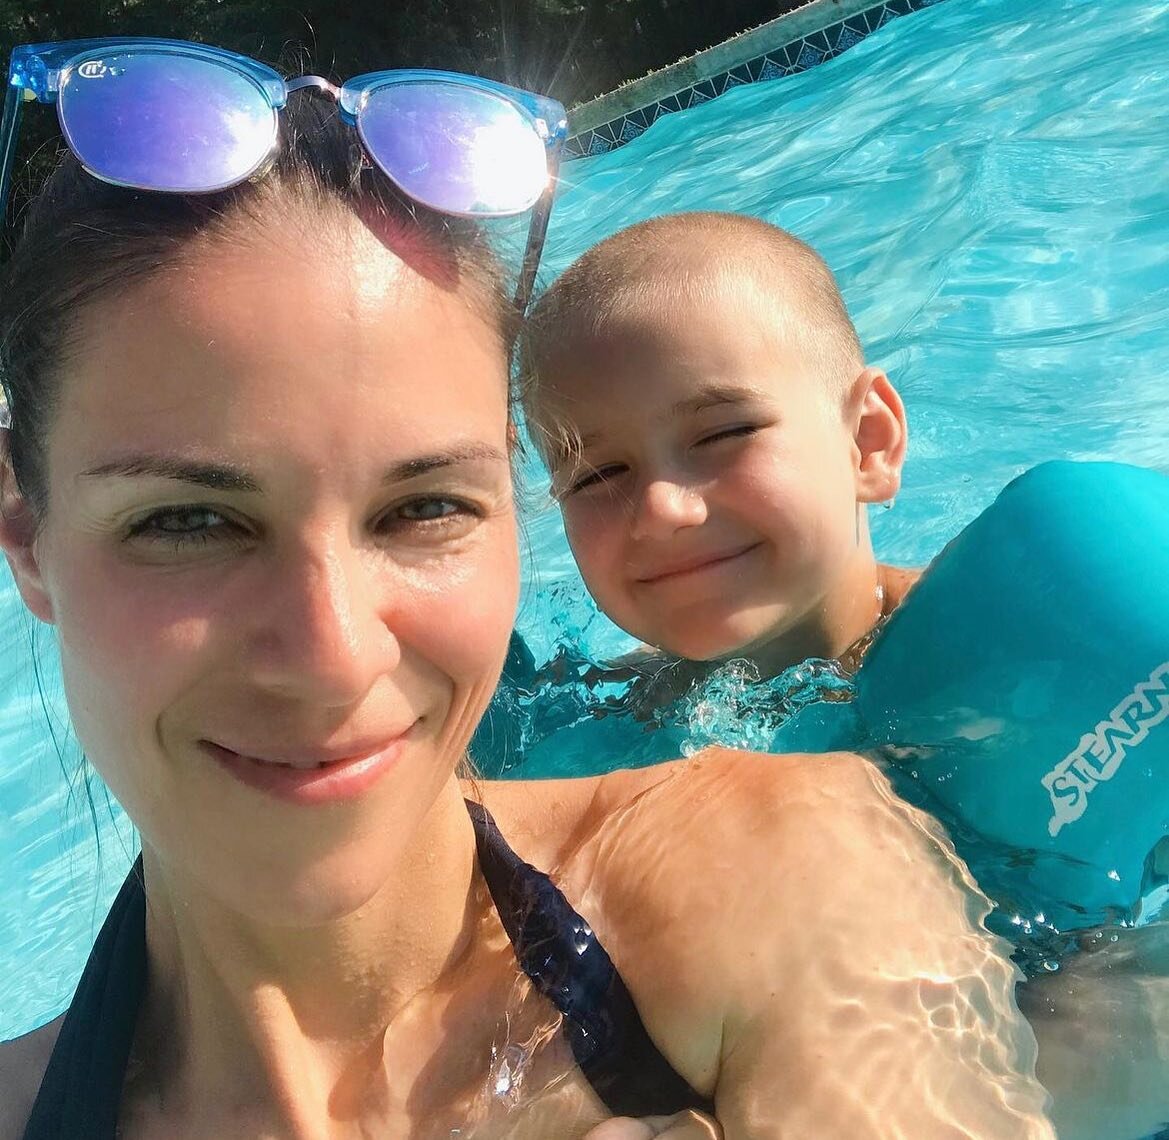 TRUTH&hellip; 

Contrary to some reports&hellip;this is the one and only &quot;bathing suit&quot; photo I've ever posted of myself on IG. A 2020 celebration of the first time that my 4-year old was ever able to swim with his mommy. 

I have an autoim